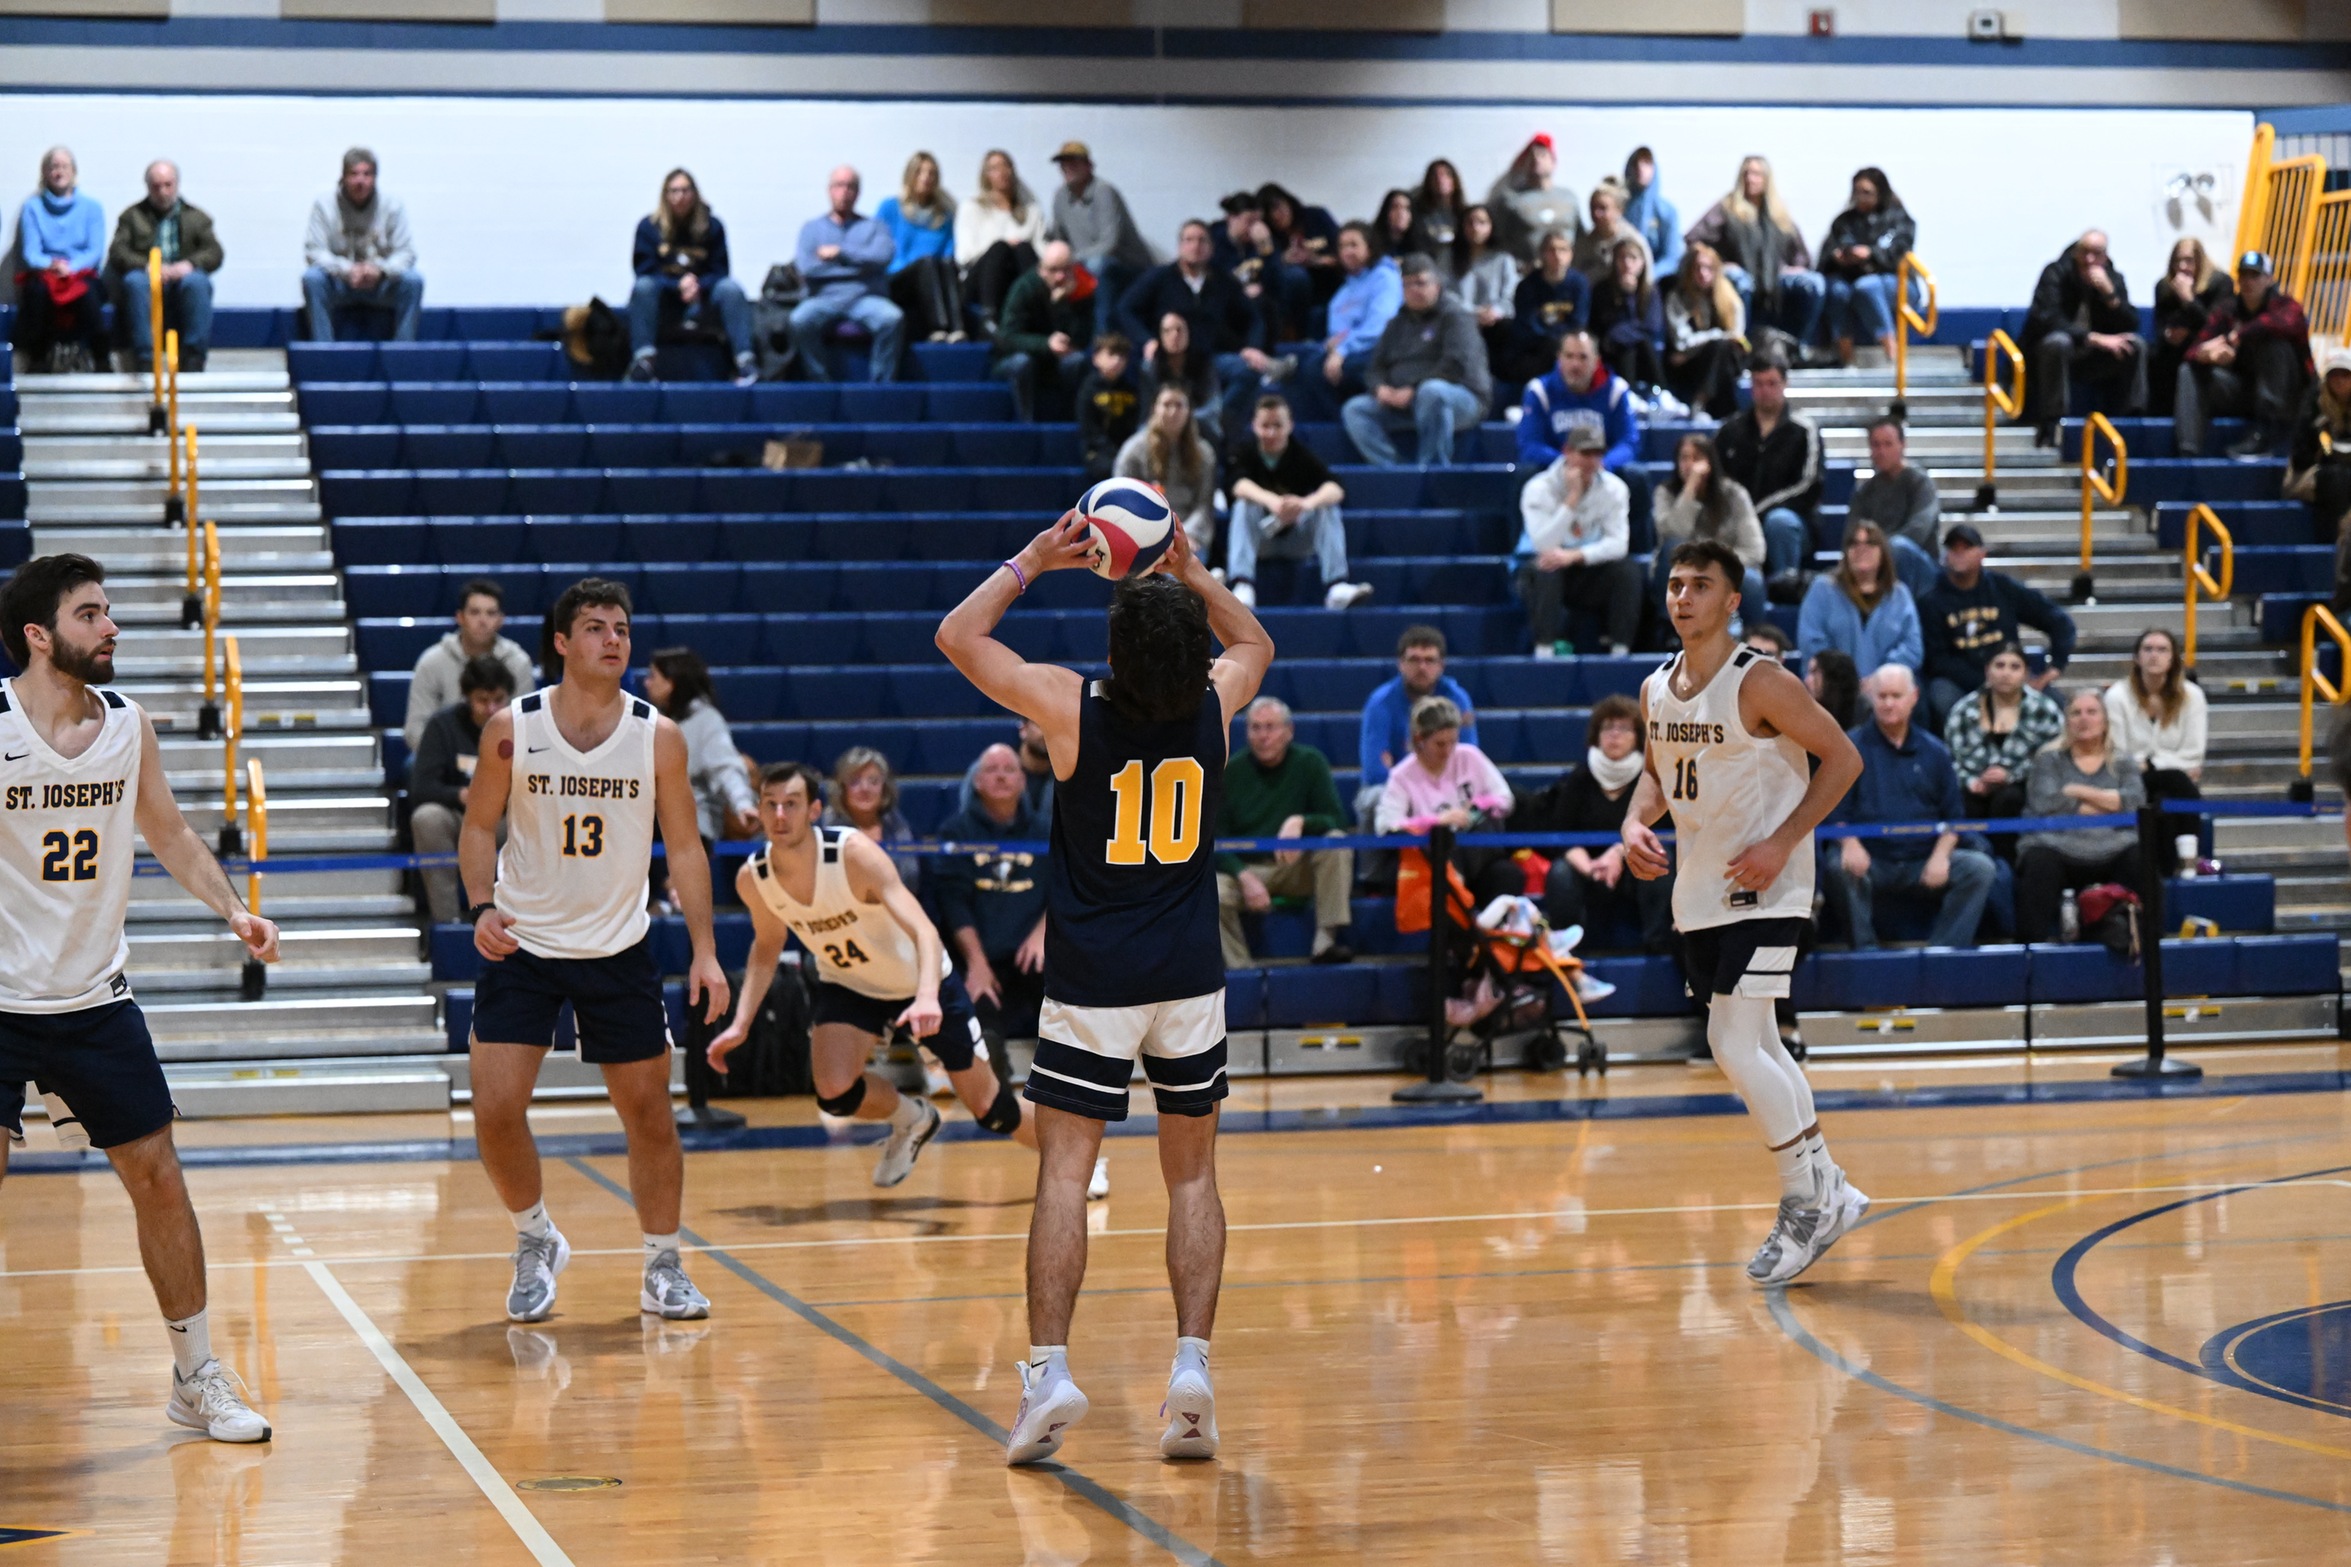 Men's Volleyball Sweeps Ramapo in Final Home Game of Regular Season